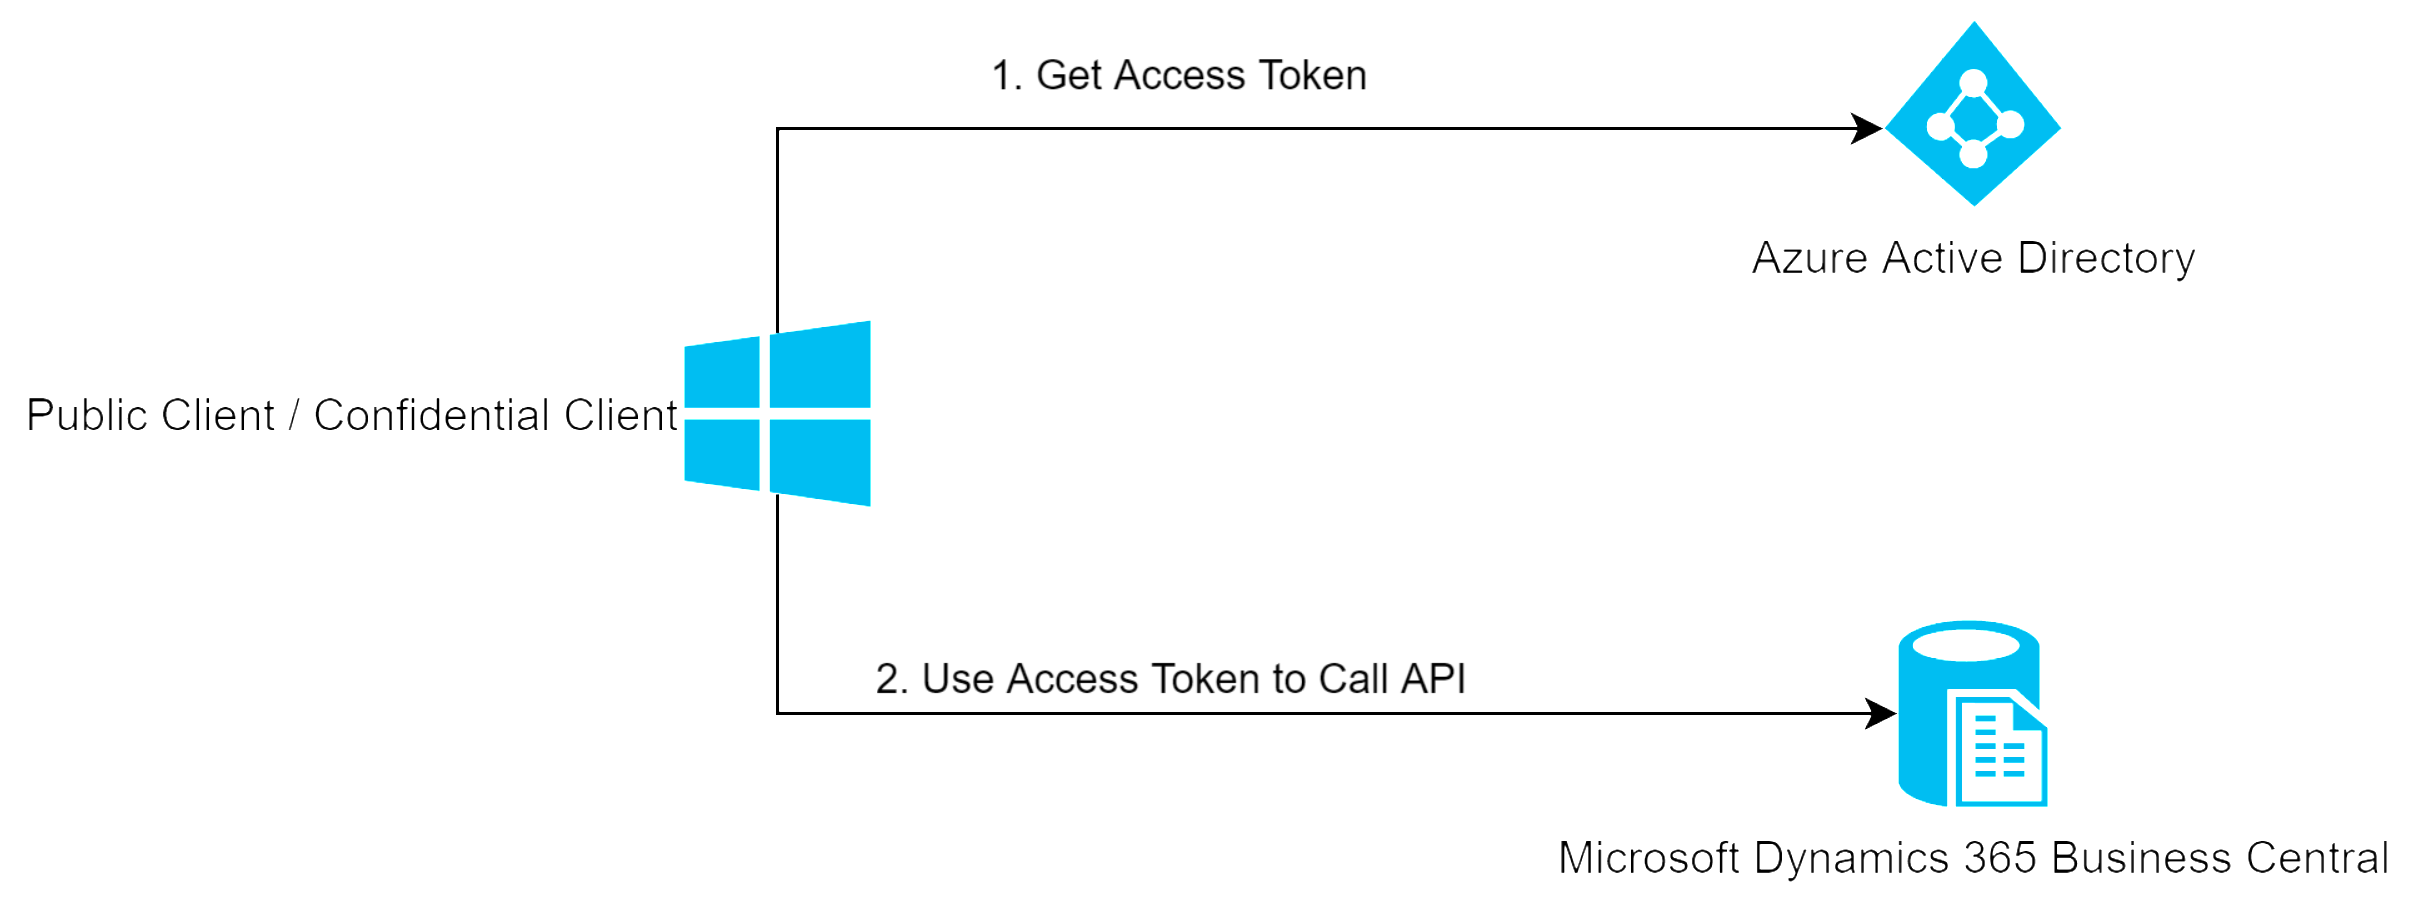 How to Authenticate Through Azure Active Directory to Use Business Central API